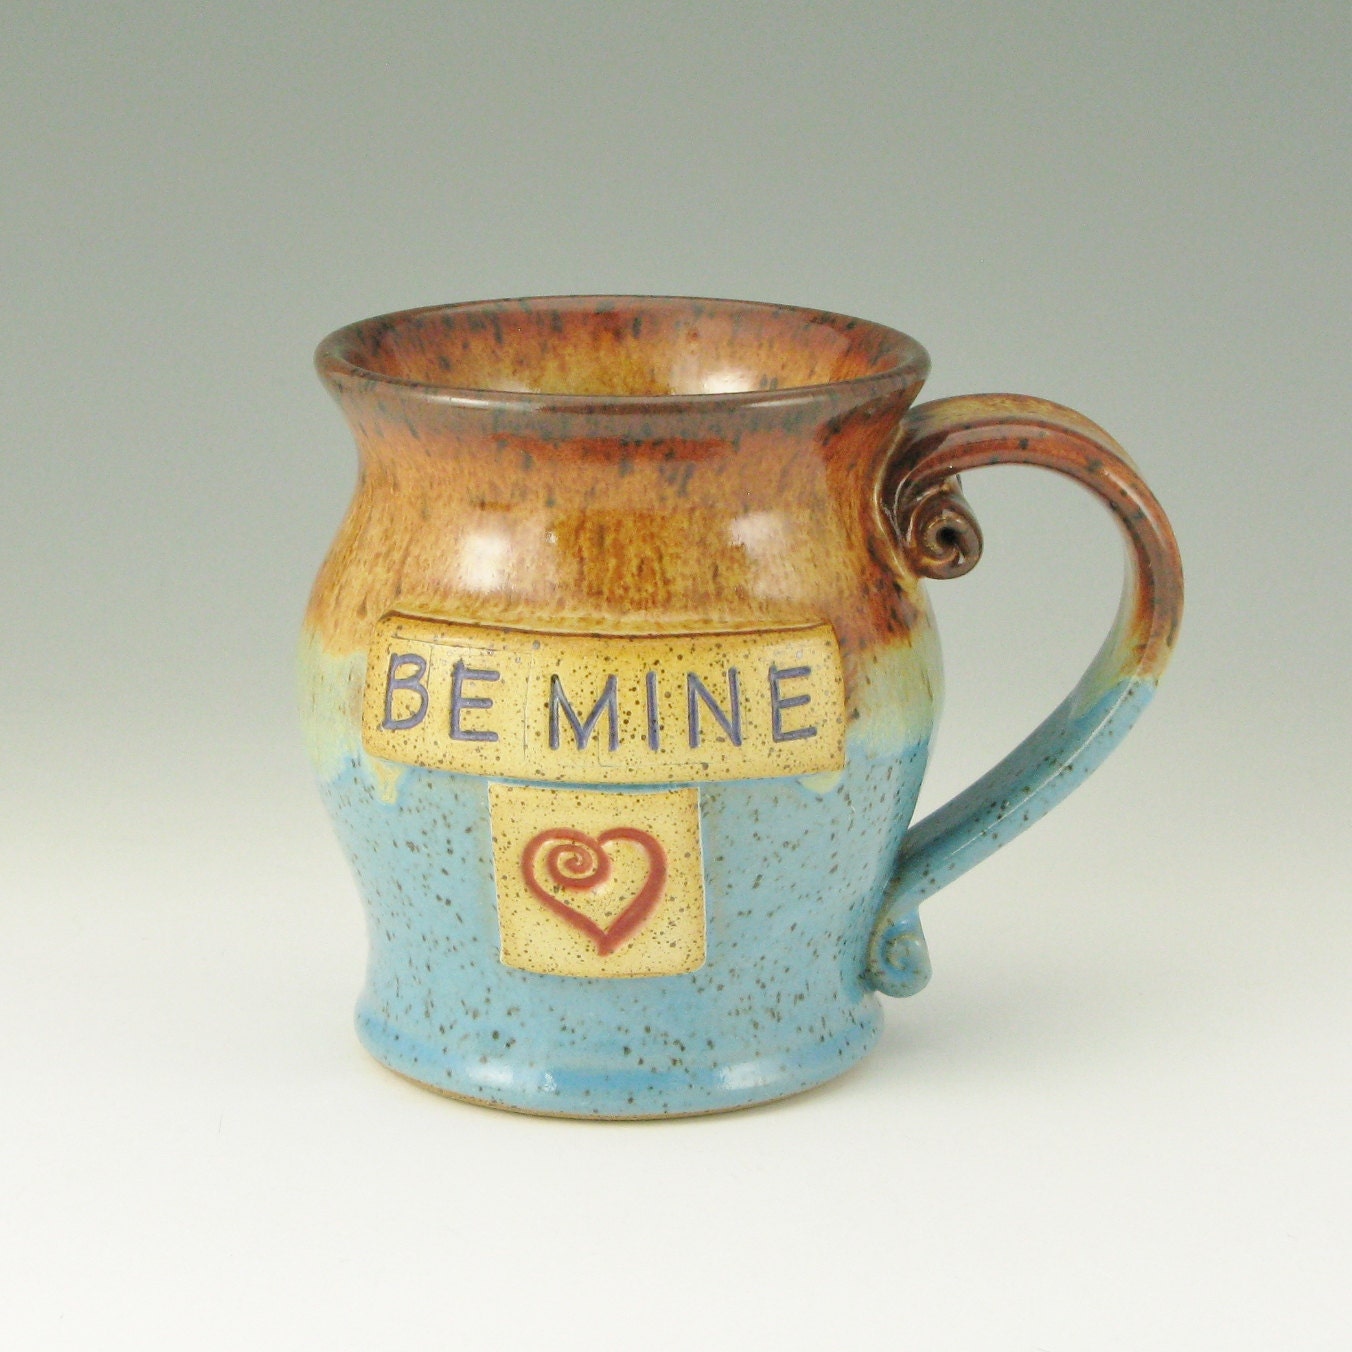 BE MINE Red Heart Valentines Day Mug, 16 Ounce Coffee Mug, Pottery Beer Mug, Honey Brown and Bright Light Blue, Ready To Ship